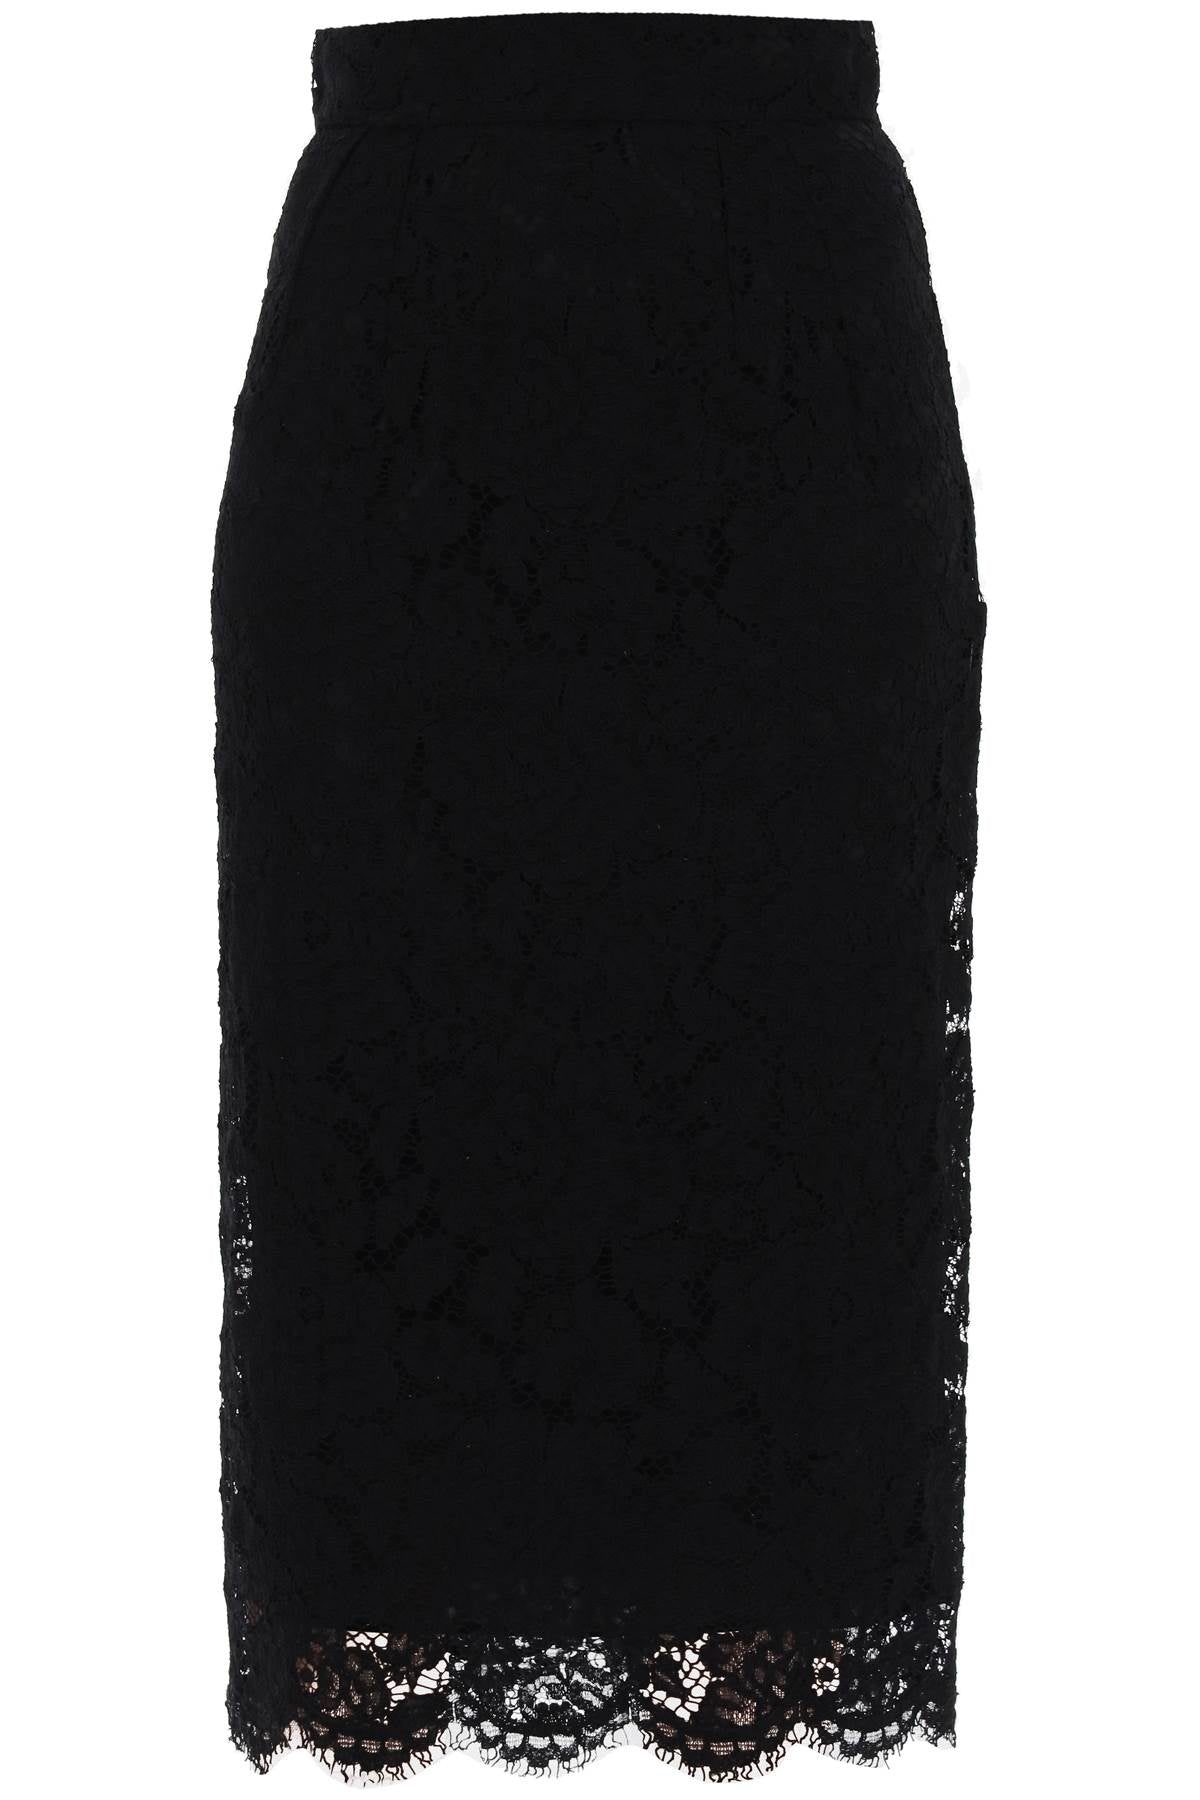 Dolce & gabbana lace pencil skirt with tube silhouette-0